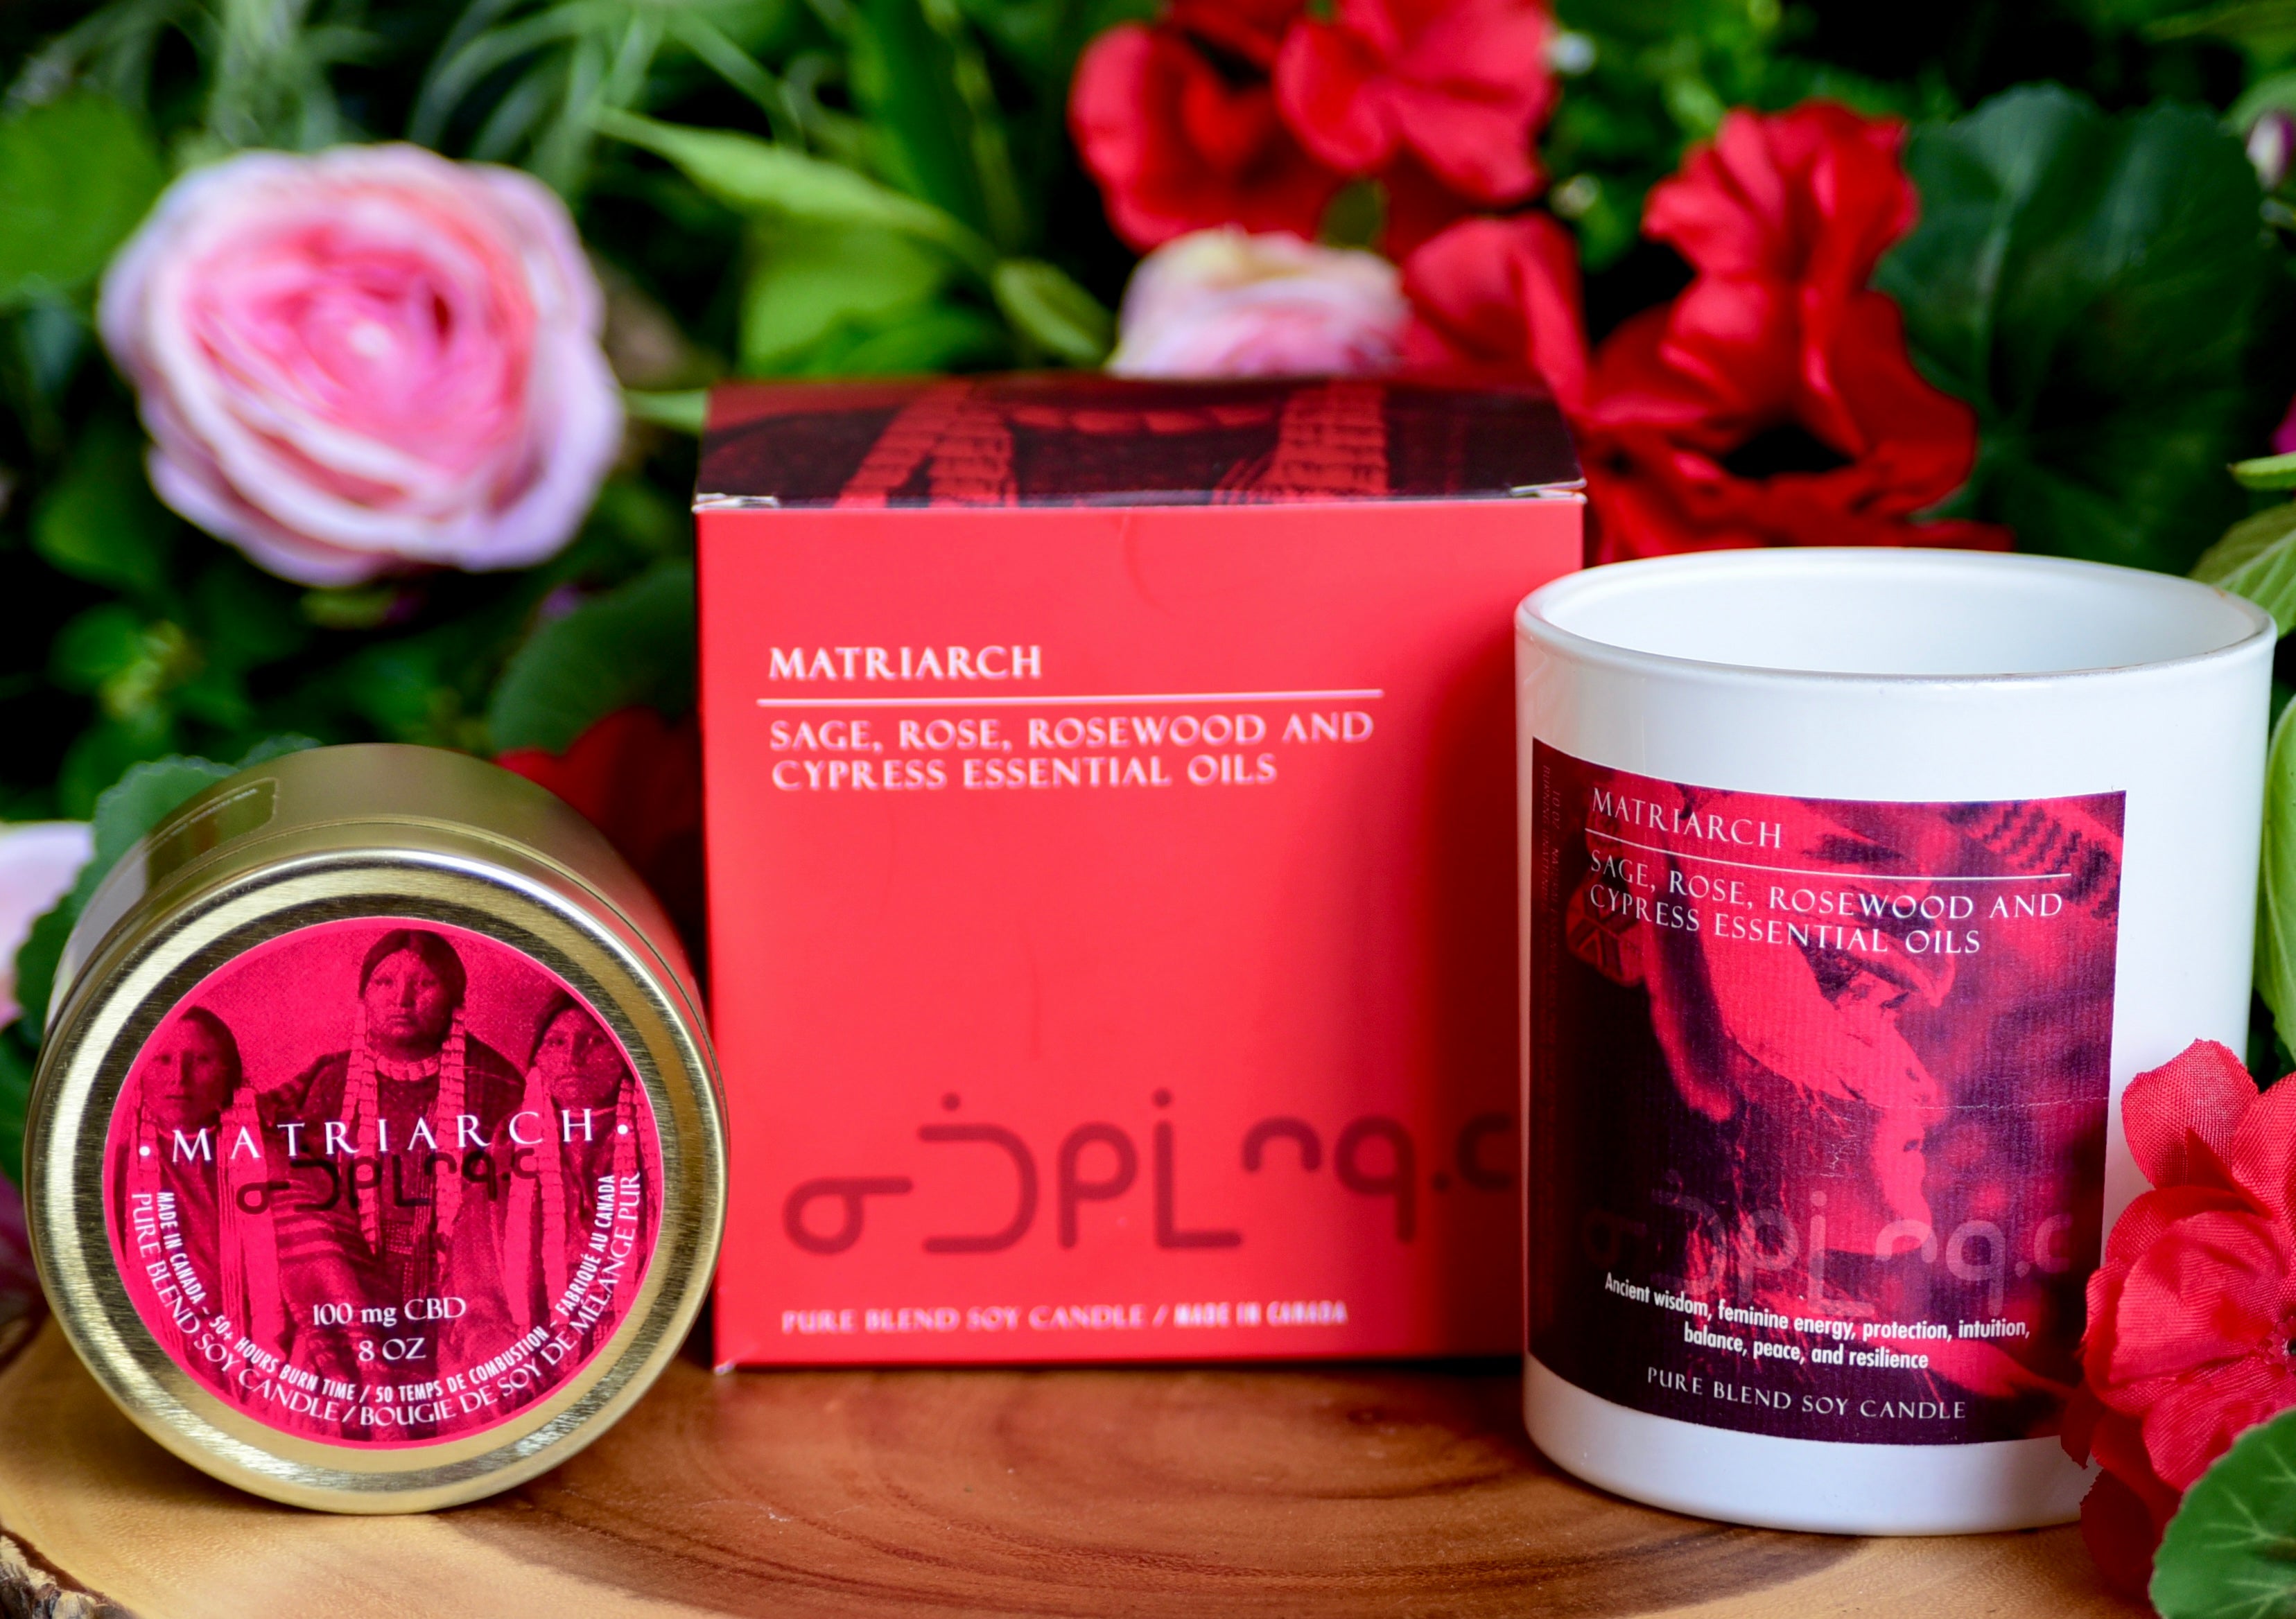 Matriarch Gift Box - NEW! - LODGE Soy Candles